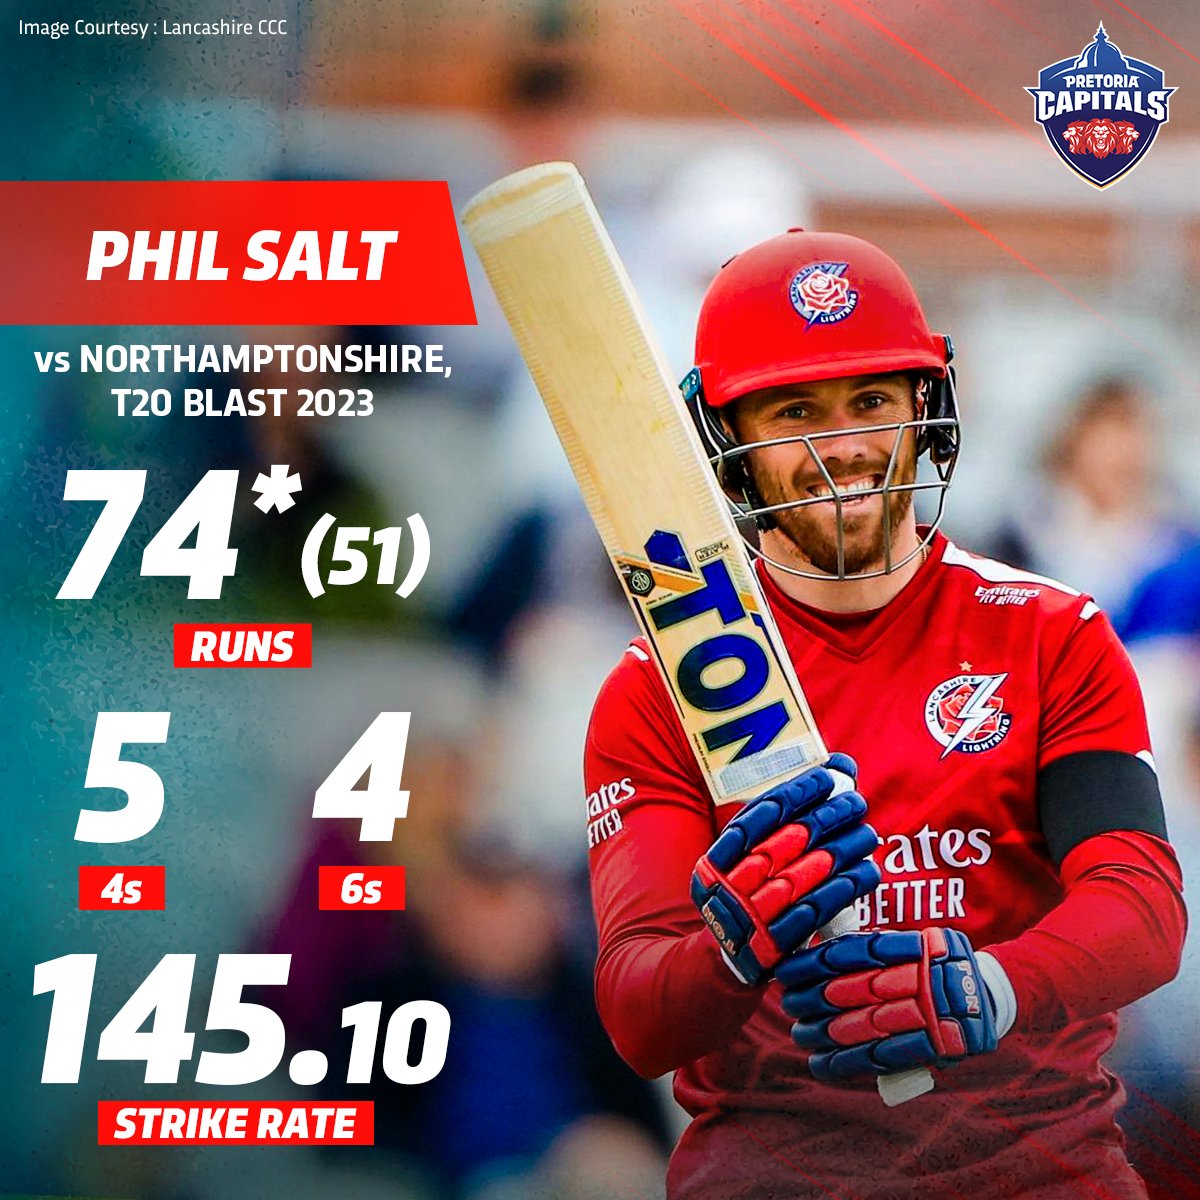 Where Salt goes, runs flow 👏

Pitori, rate his knock on tag scale of 🤩 to 🤯!

#Blast23 #RoarSaamMore